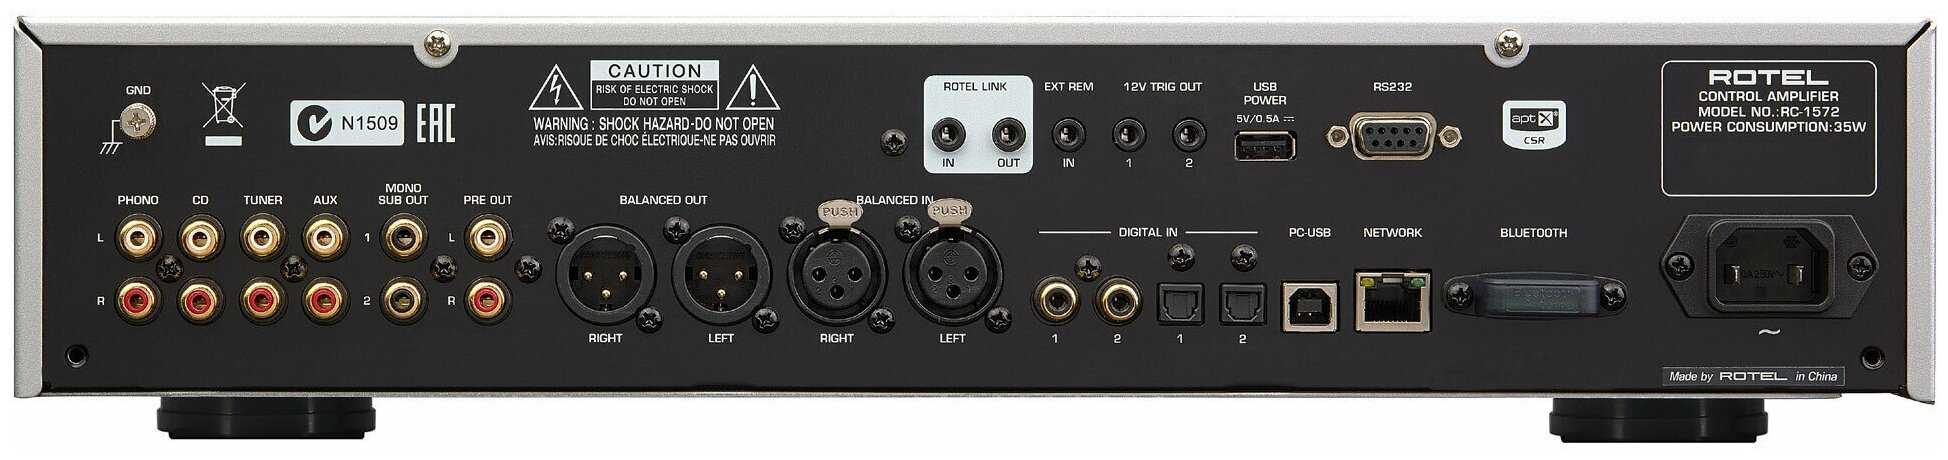 Rotel rc-1590mkii pre-amp review - hometheaterreview